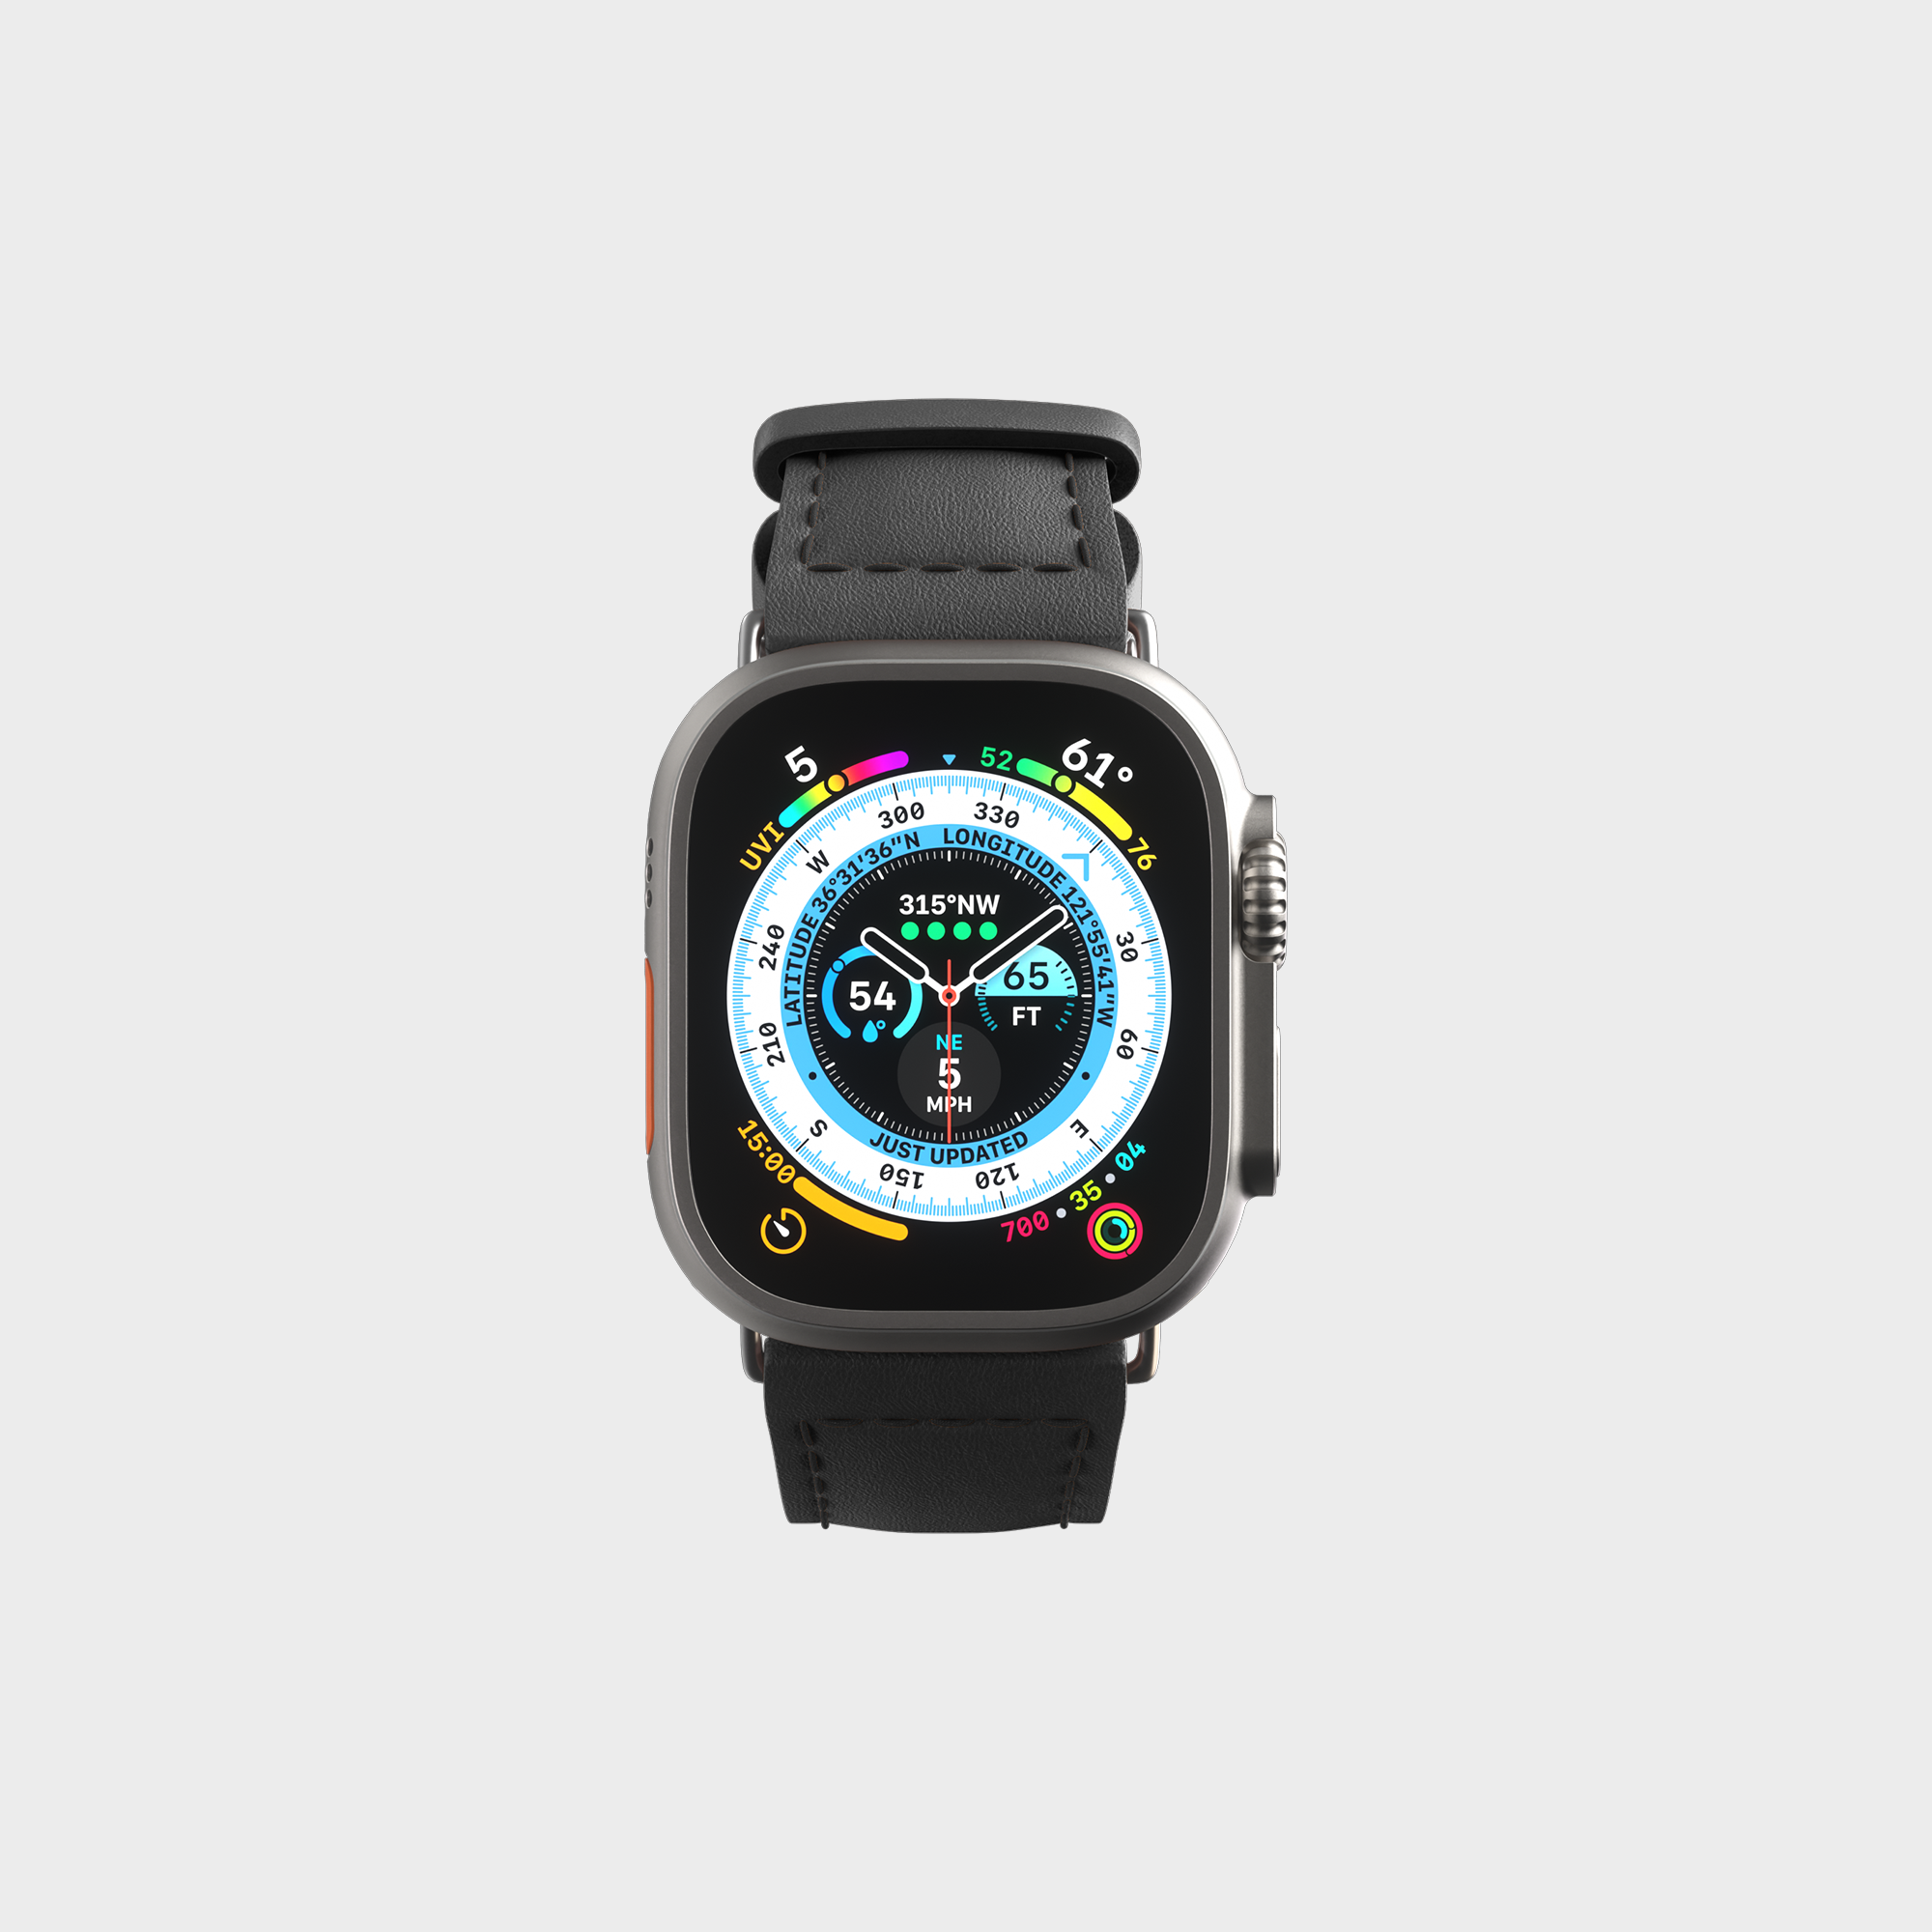 Smartwatch with black strap displaying colorful compass interface isolated on white background.